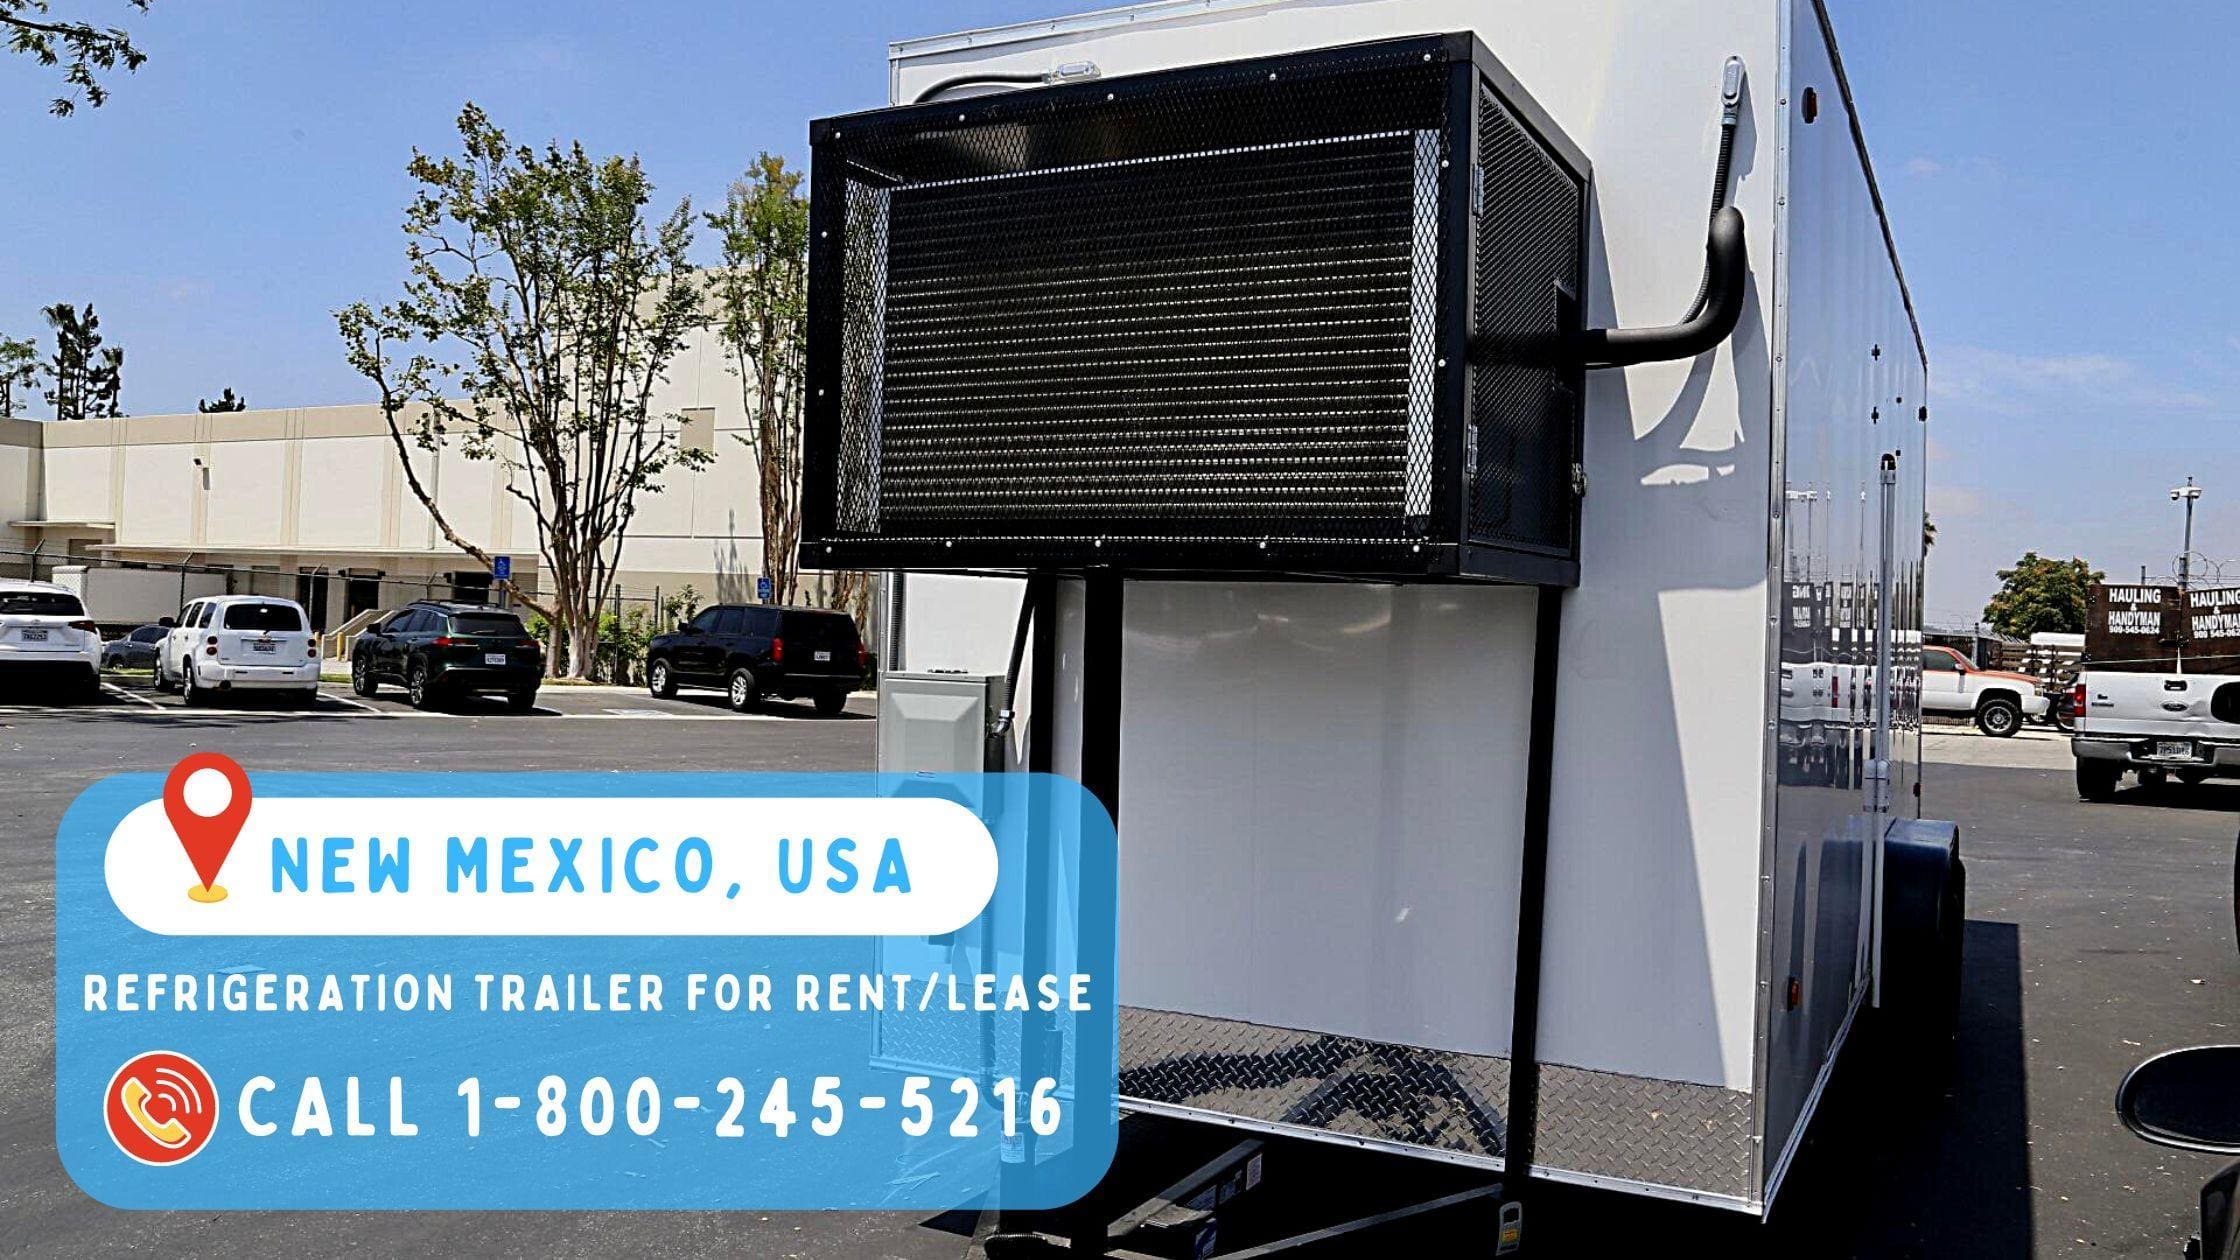 REFRIGERATION TRAILER FOR RENT/LEASE IN NEW MEXICO